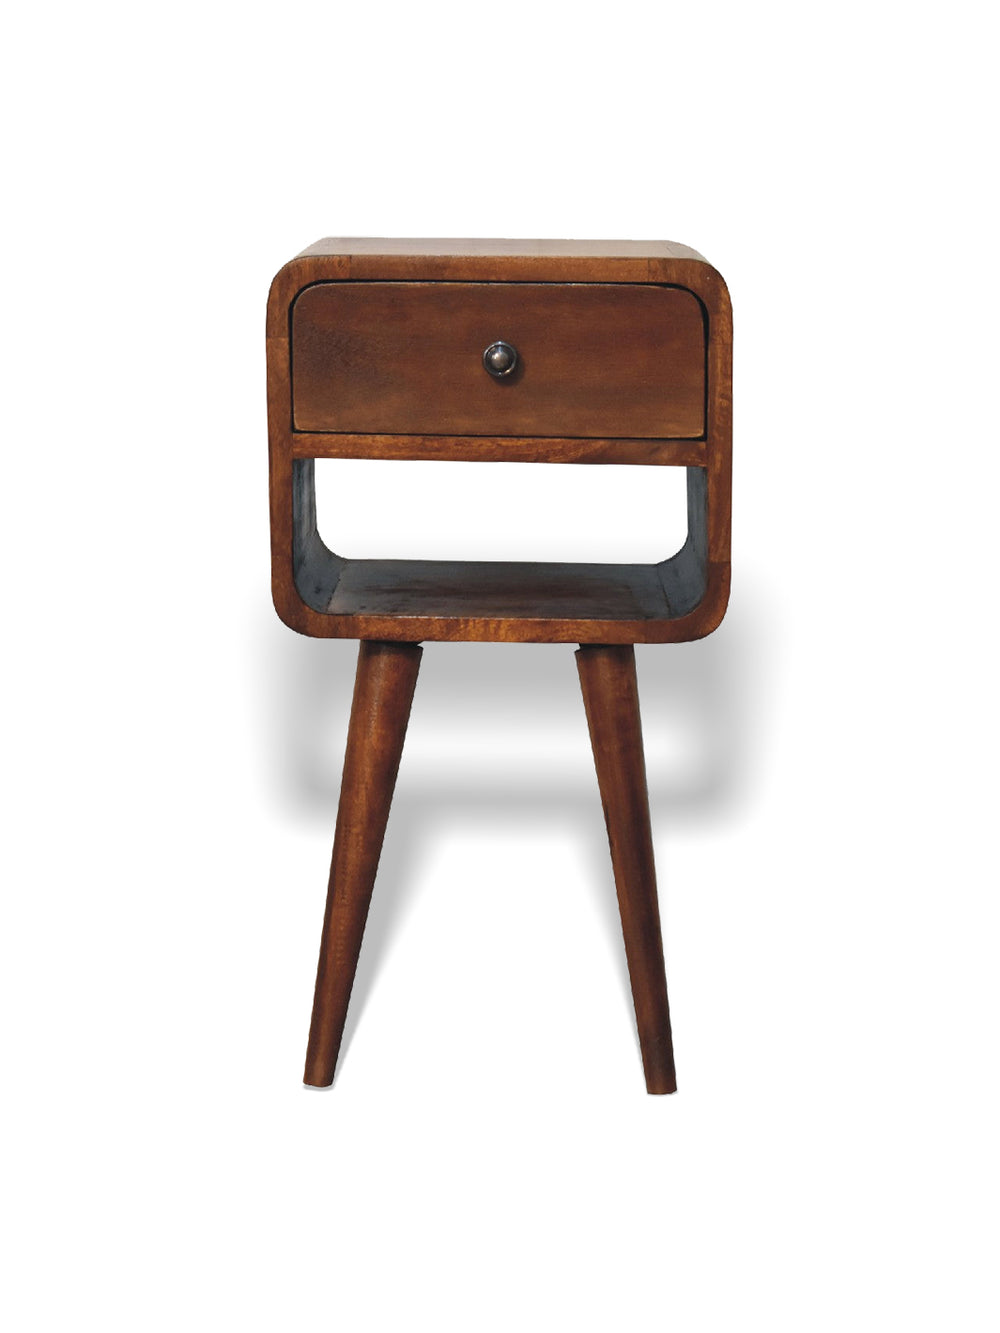 Mini Chestnut Curved Bedside with Lower Slot Artisan Furniture  IN3350-1